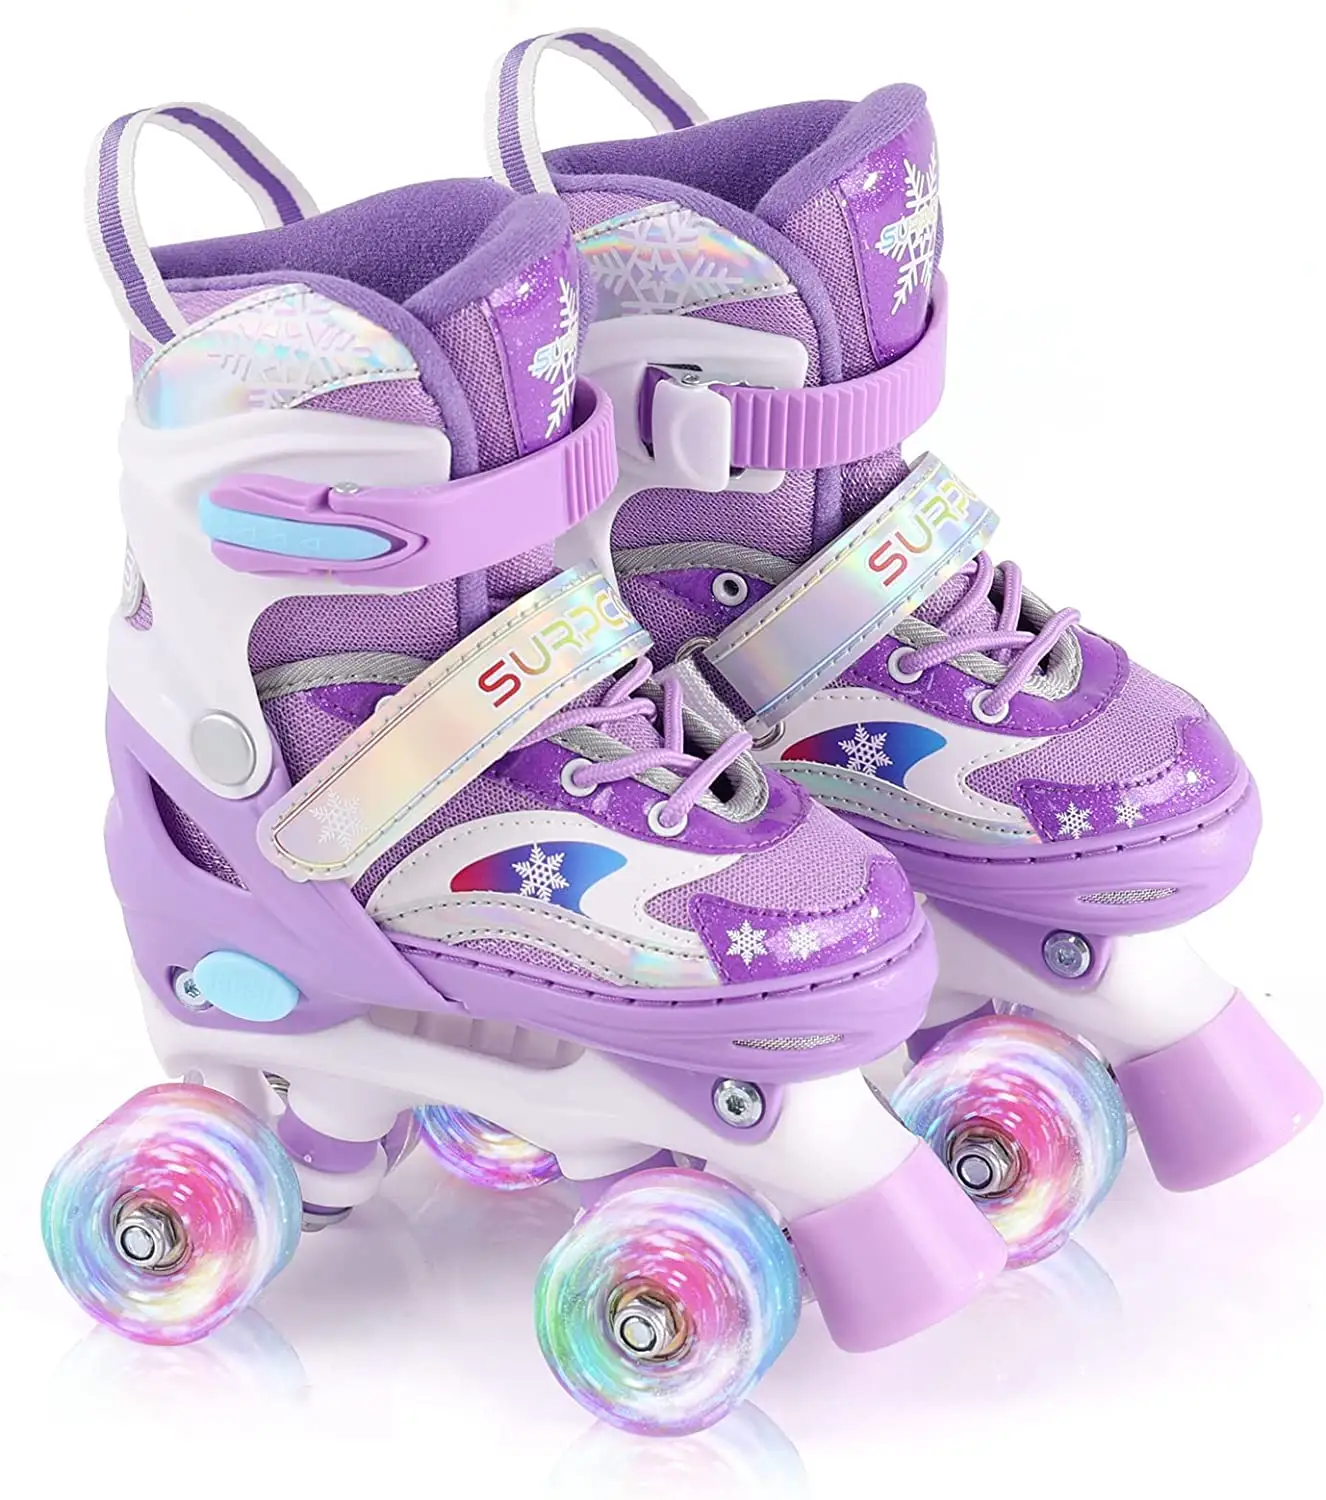 Roller Skates for Girls and Boys Adjustable Roller Skates for Kids Light Up Roller Skates Child Beginners for Outdoor Sports